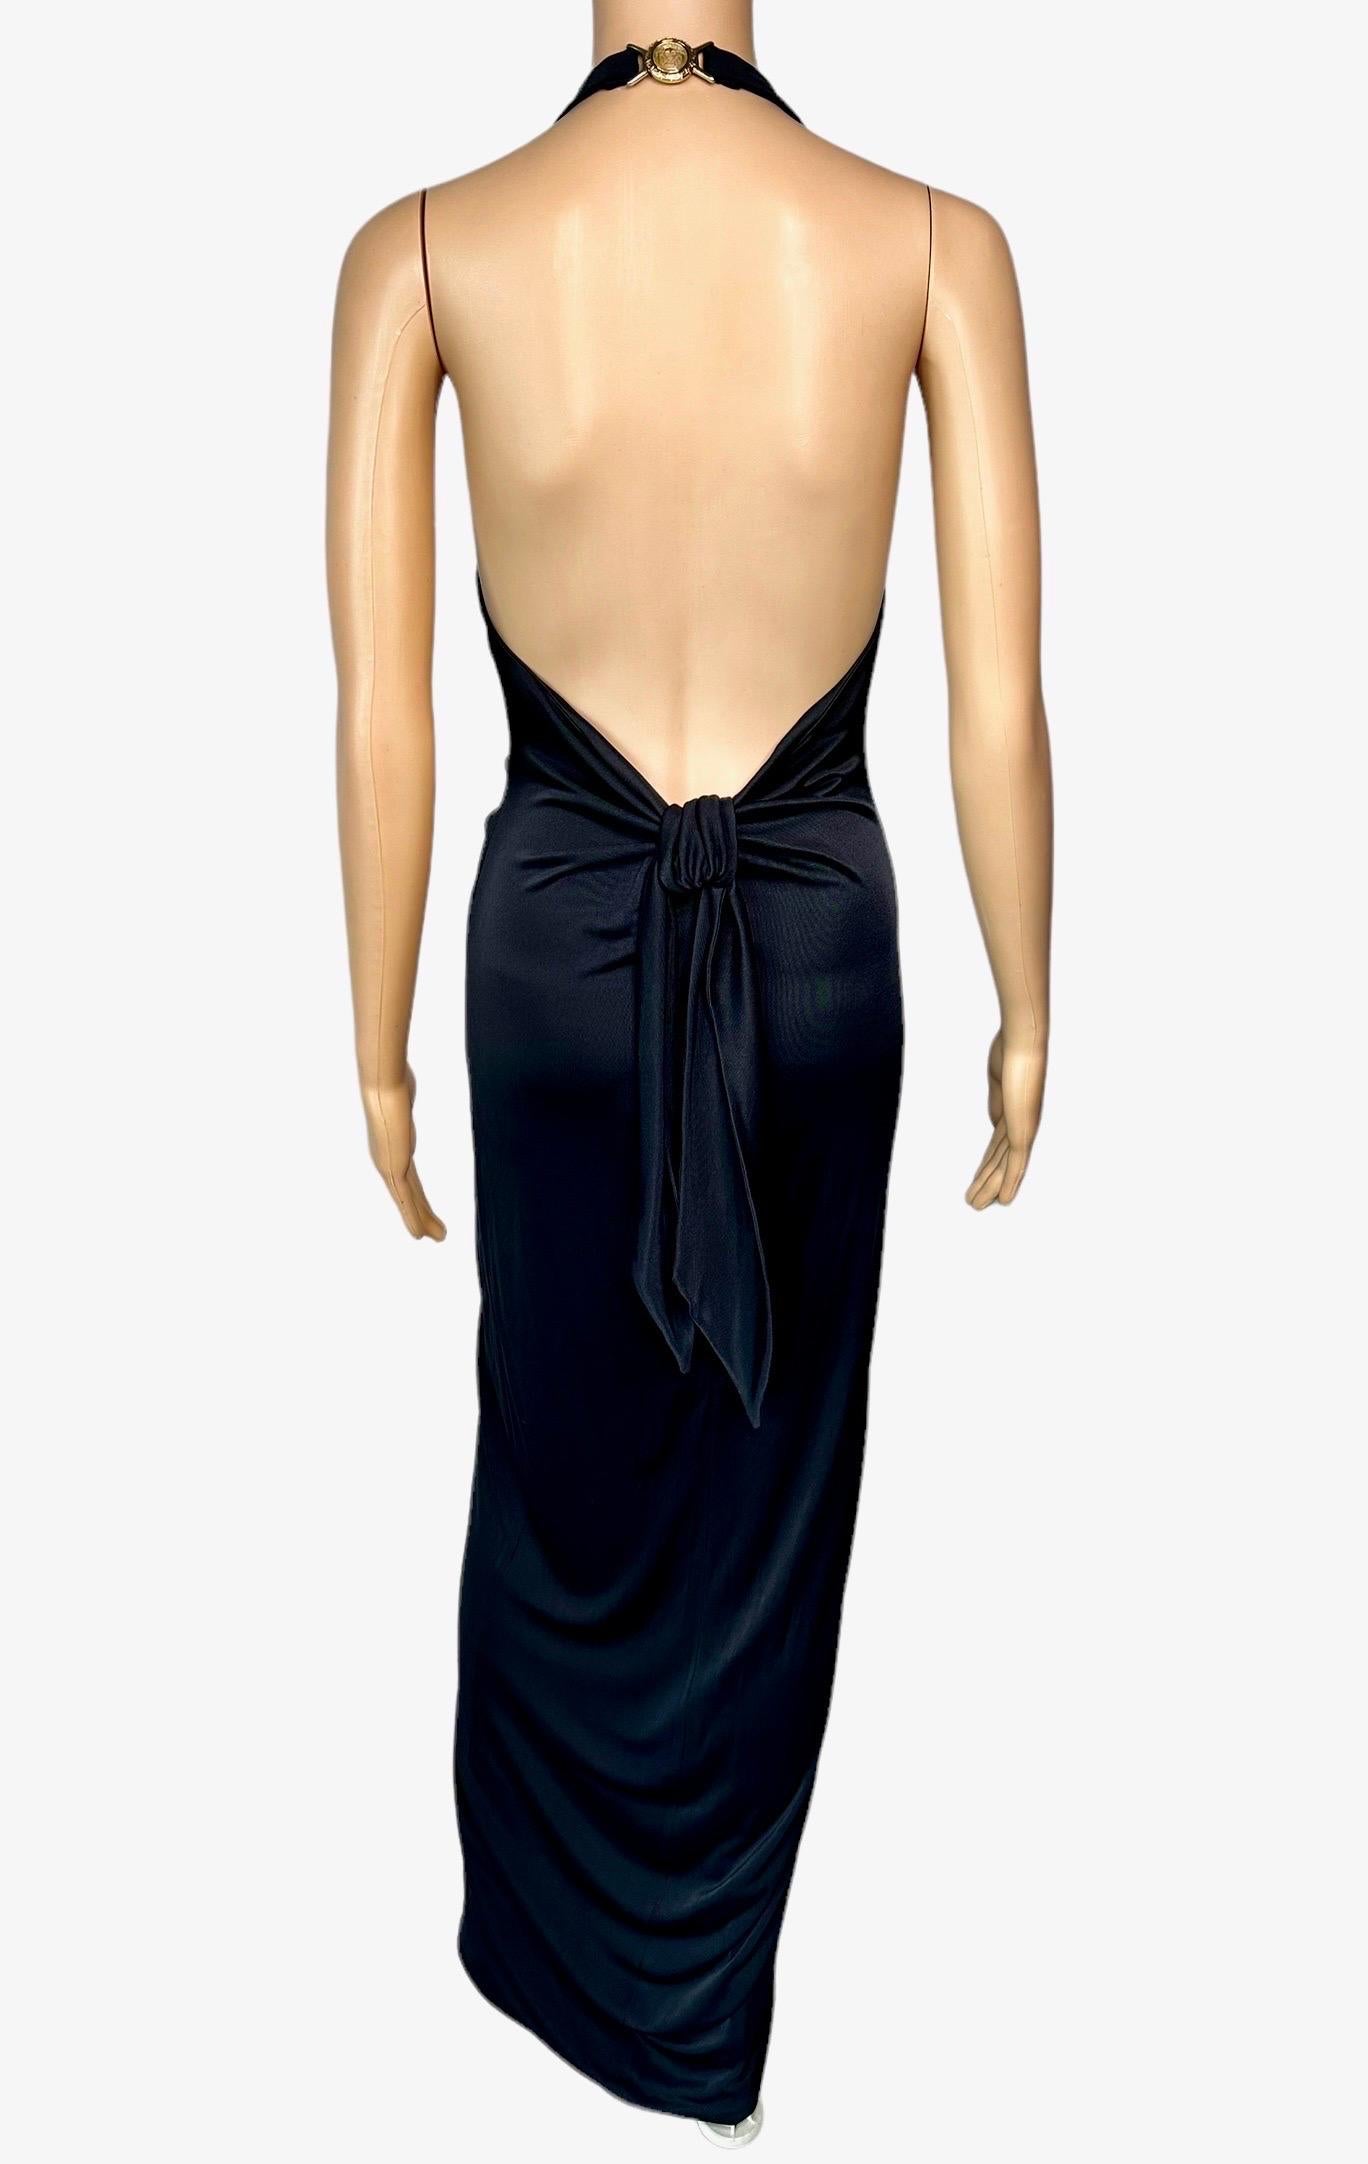 Versace S/S 2005 Runway Plunging Hi-Low Ruched Open Back Evening Dress Gown For Sale 3